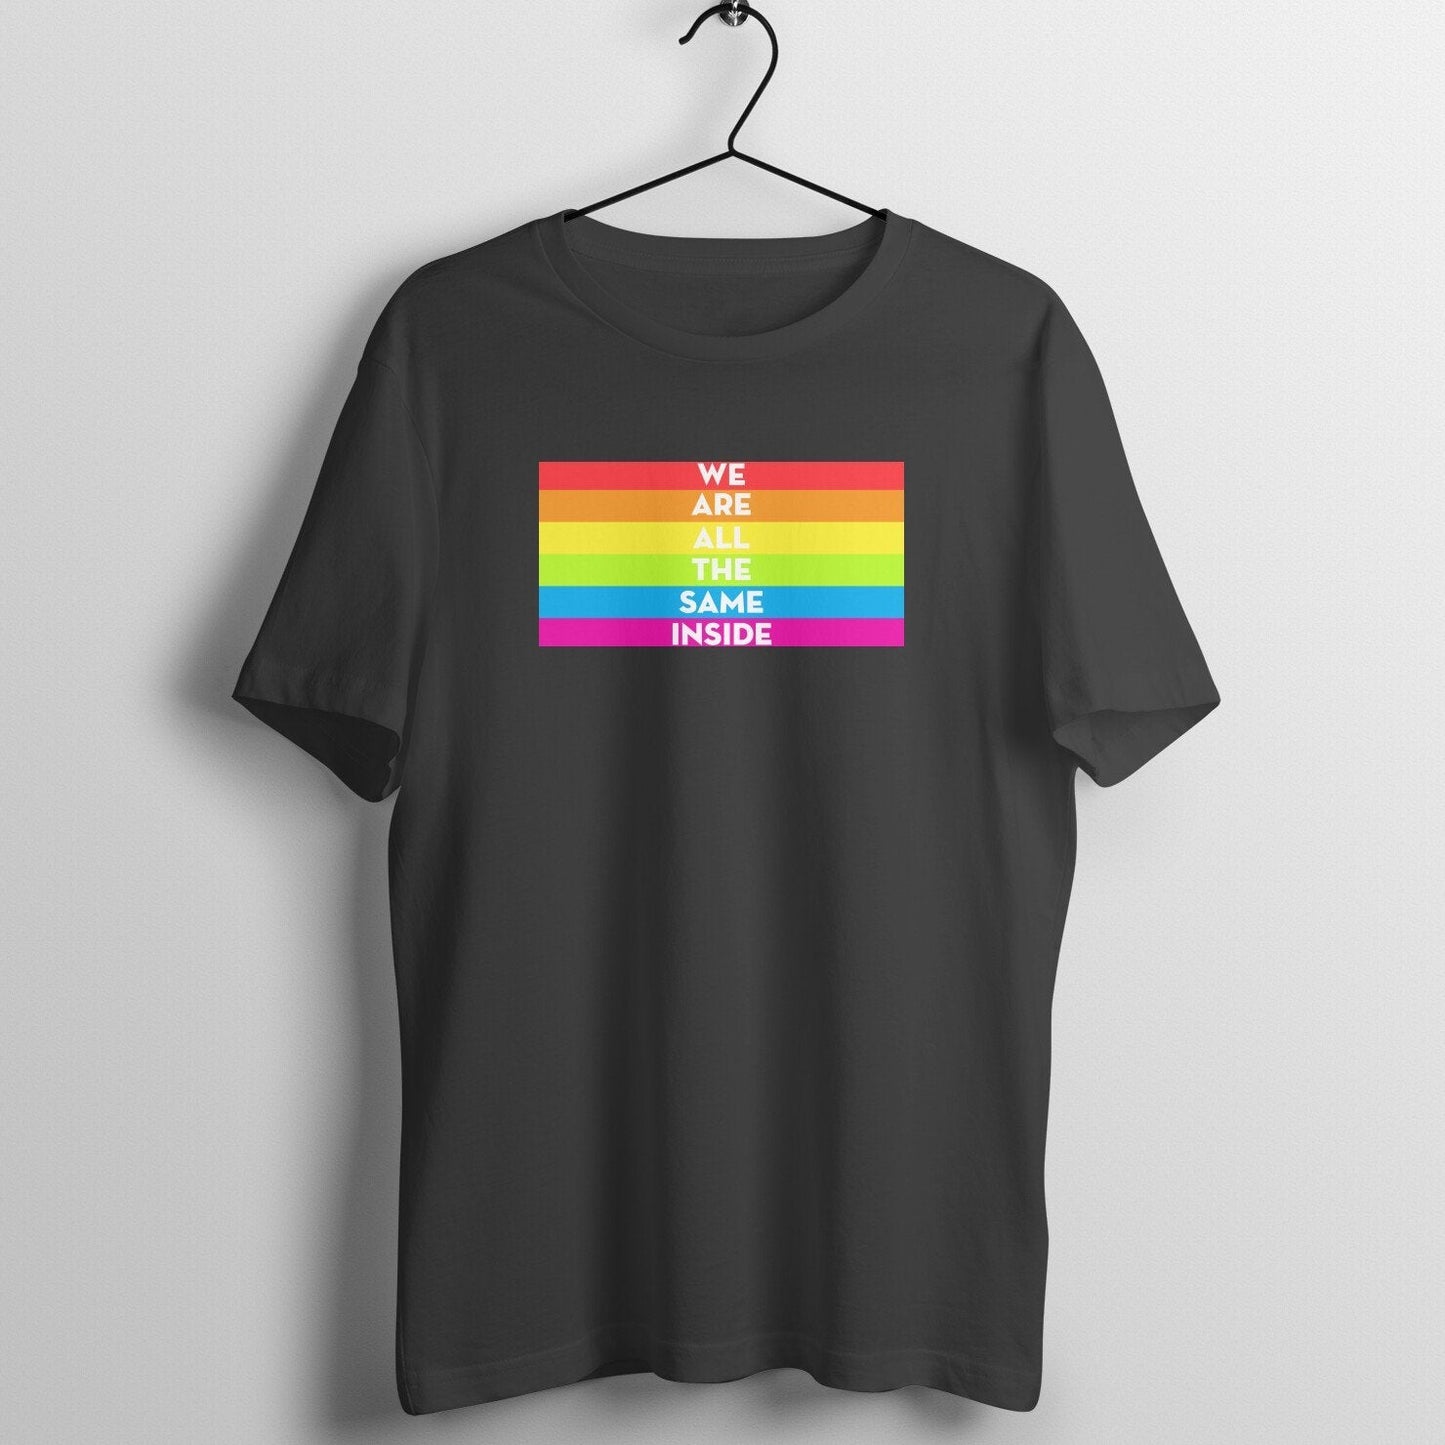 We are all the same Inspired LGBT Tshirt for Men